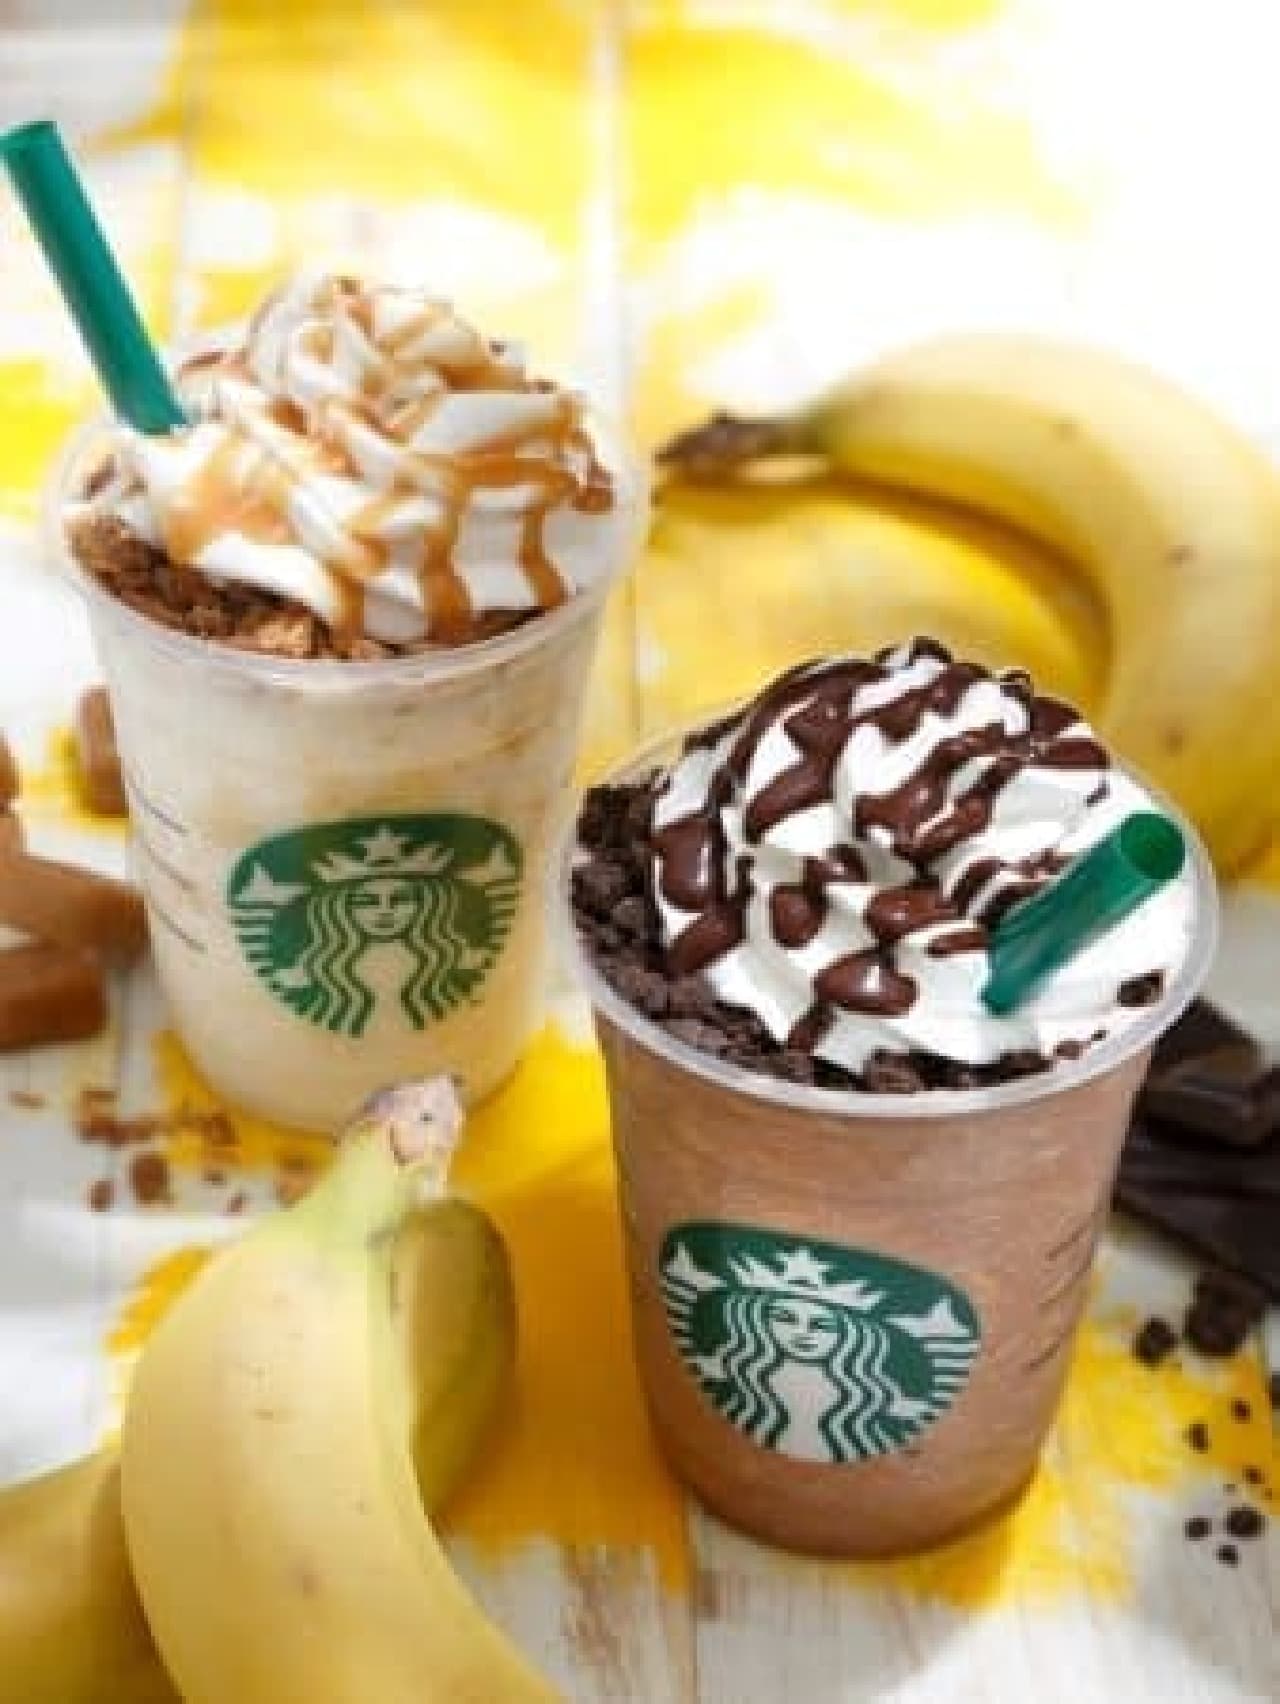 Frappuccino of "whole raw banana" for a limited time